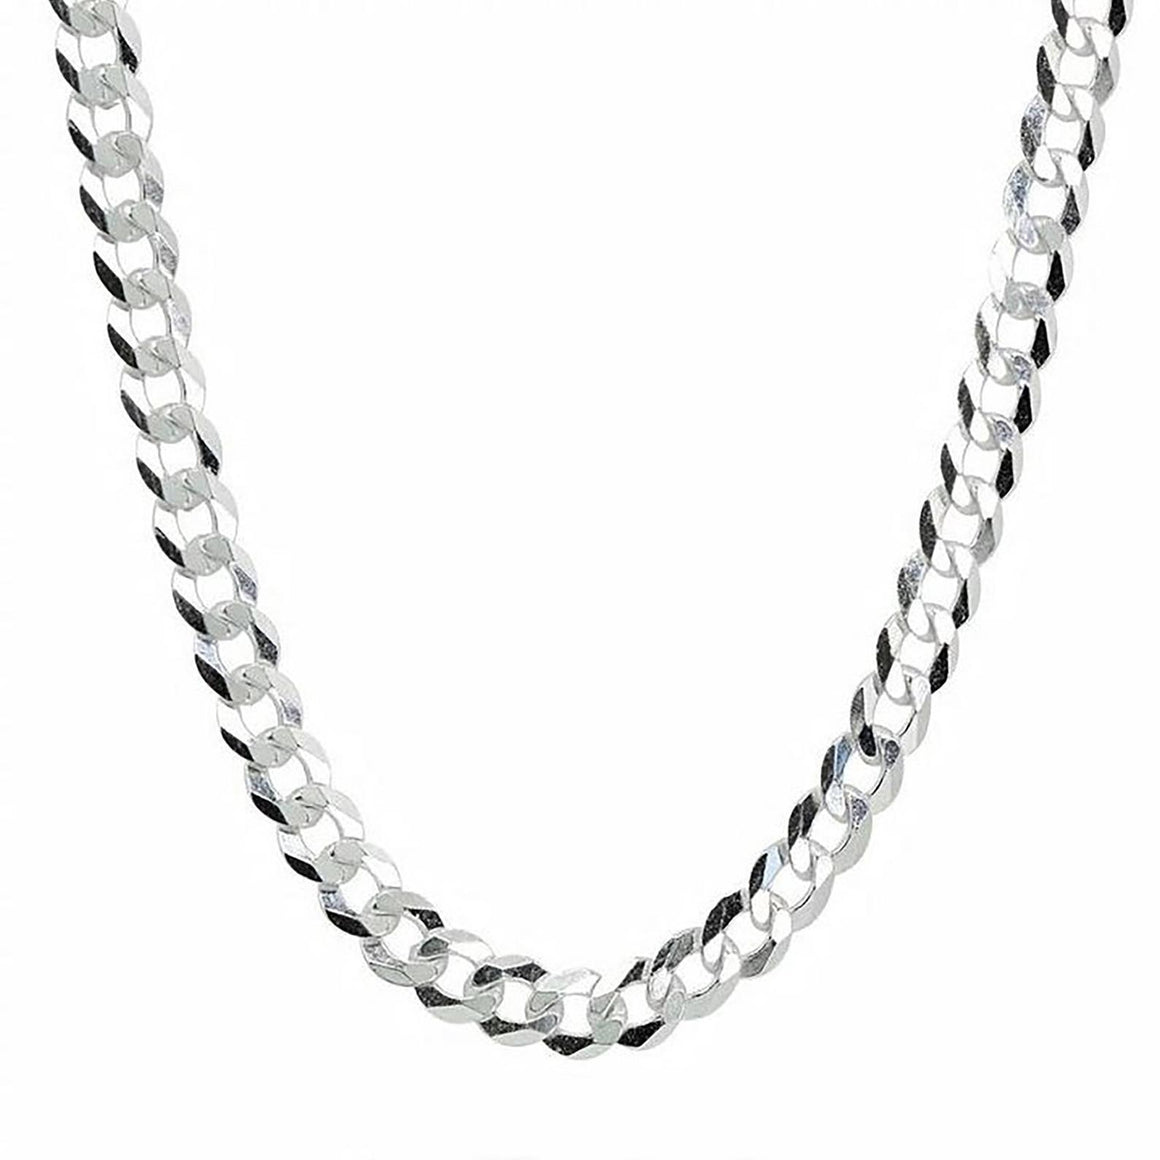 54 FLORAL 4mm CURB STERLING SILVER NECKLACE CHAIN - SILVER